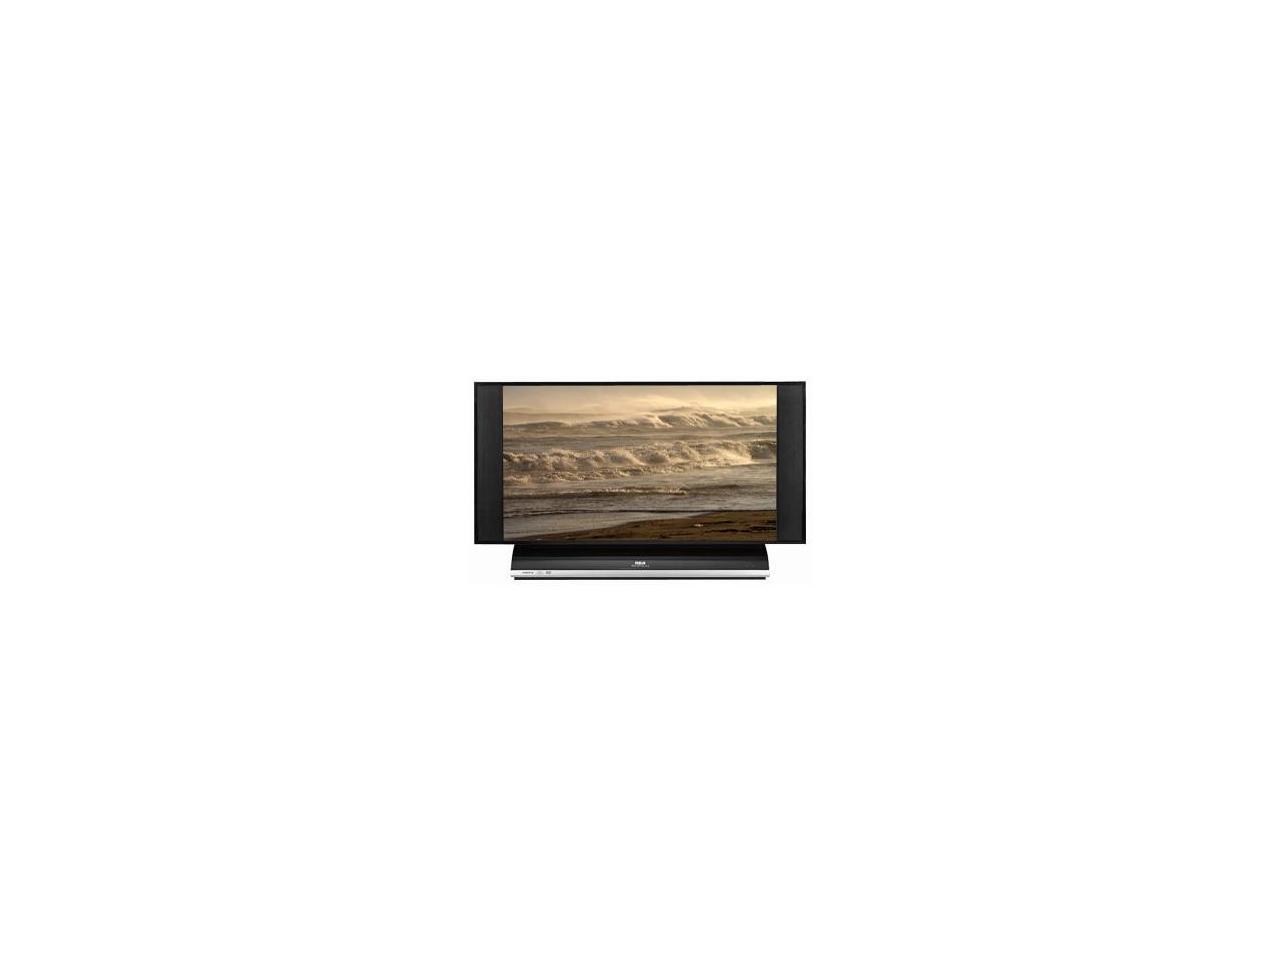 RCA 1280 x 720 Scenium HDTV with HDMI Input 6.0 Cabinet HD61LPW175